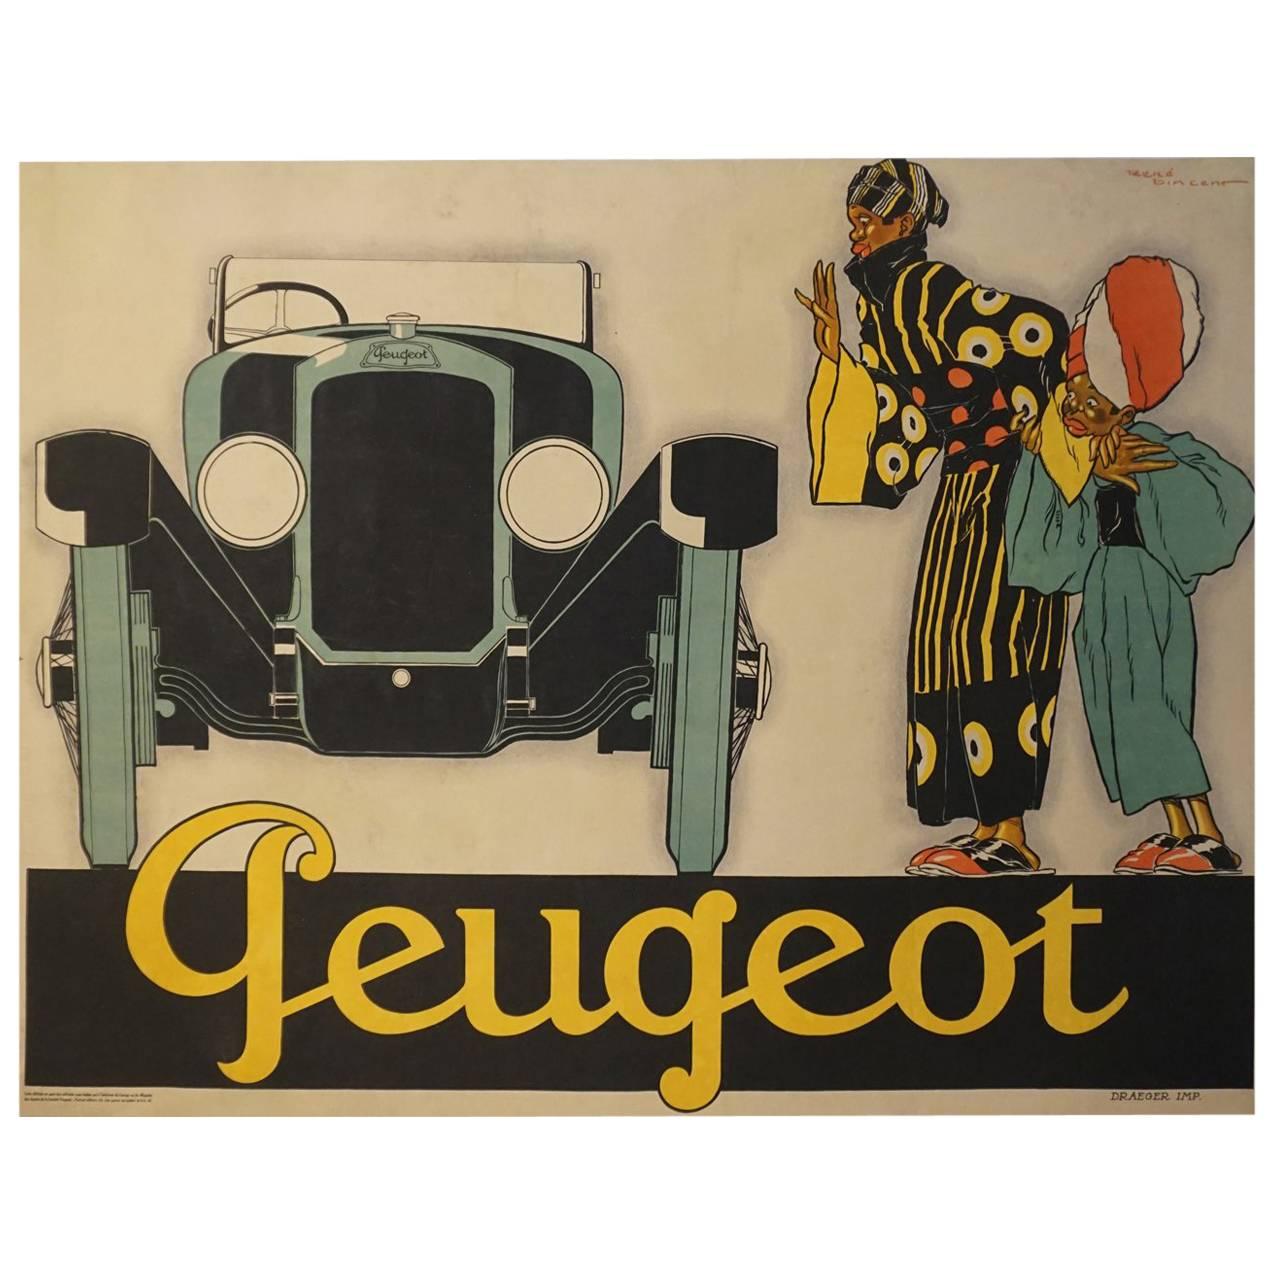 French Art Deco Automobile Advertising Poster for Peugeot by Rene Vincent, 1925 For Sale